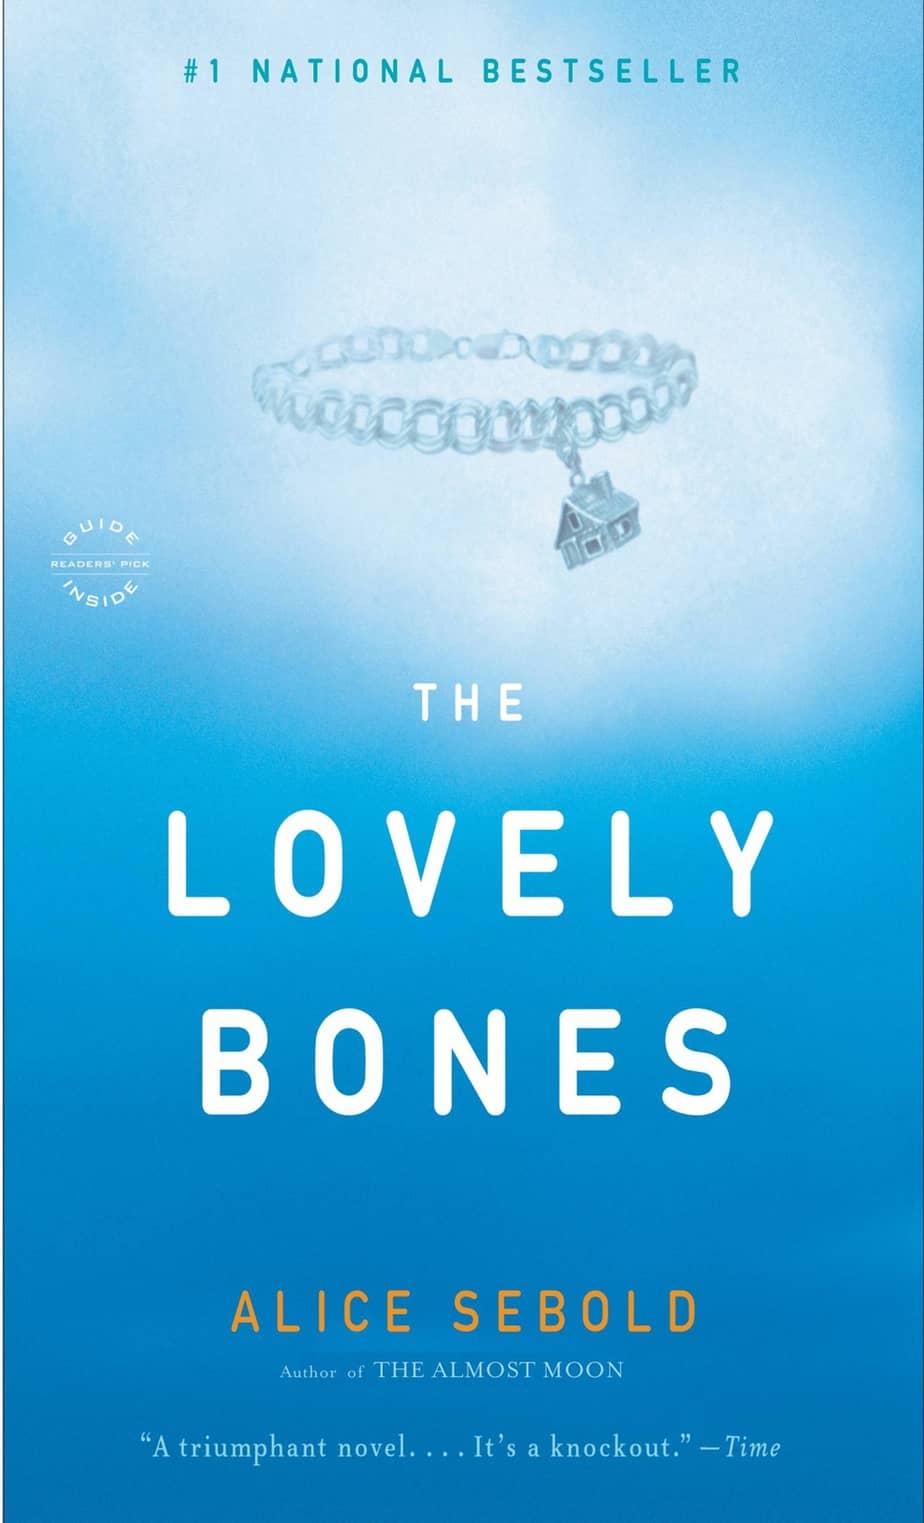 The Influence of The Lovely Bones on Modern Literature